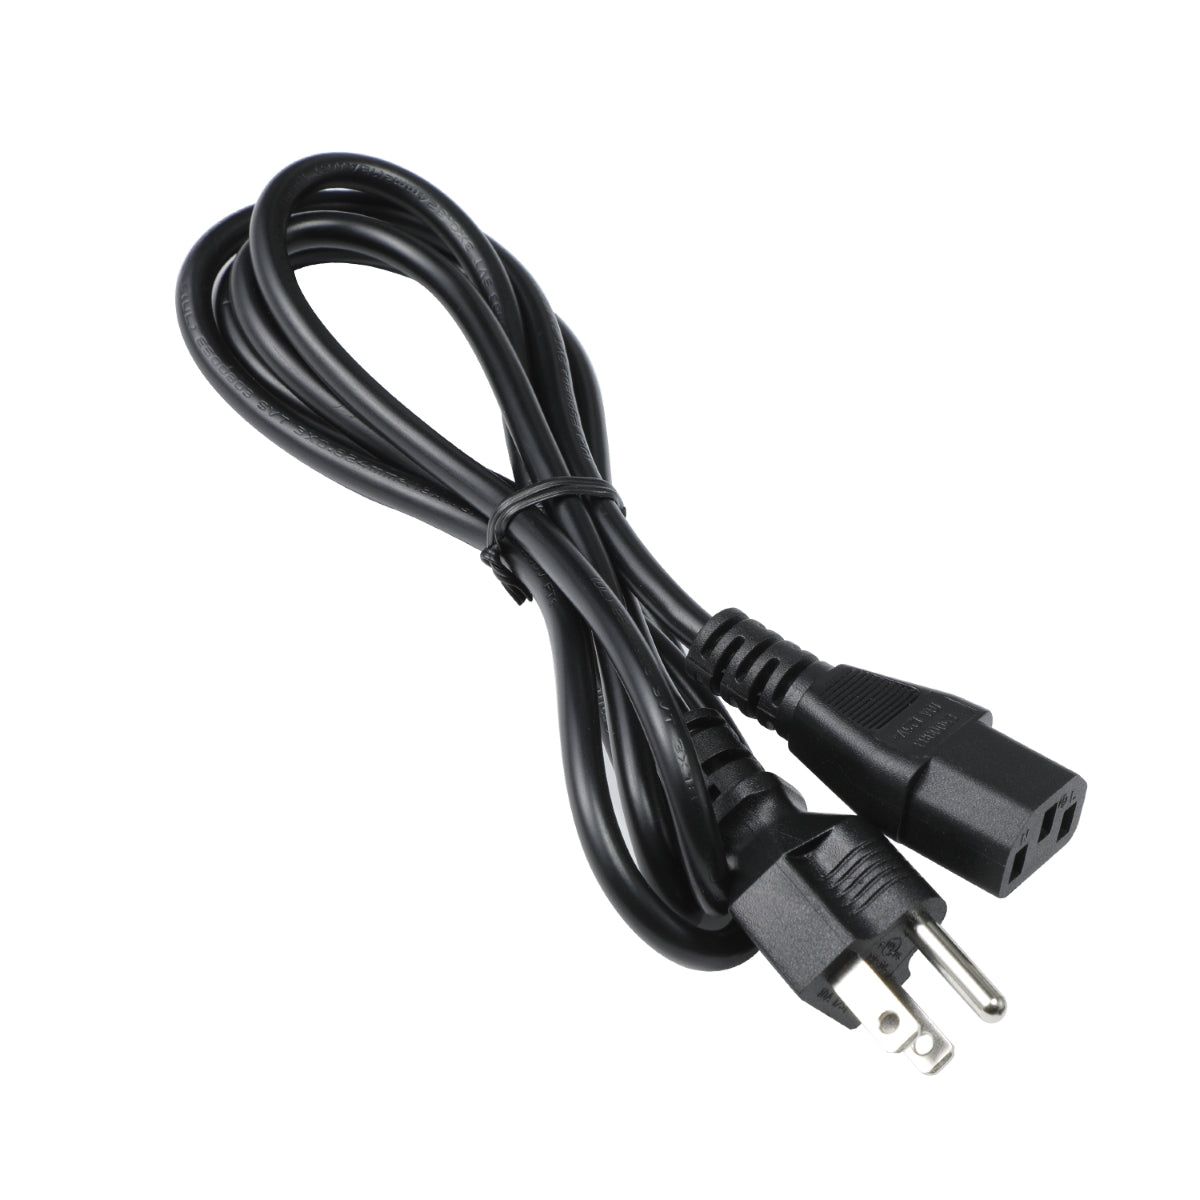 Power Cord for Dell U3818DW Monitor